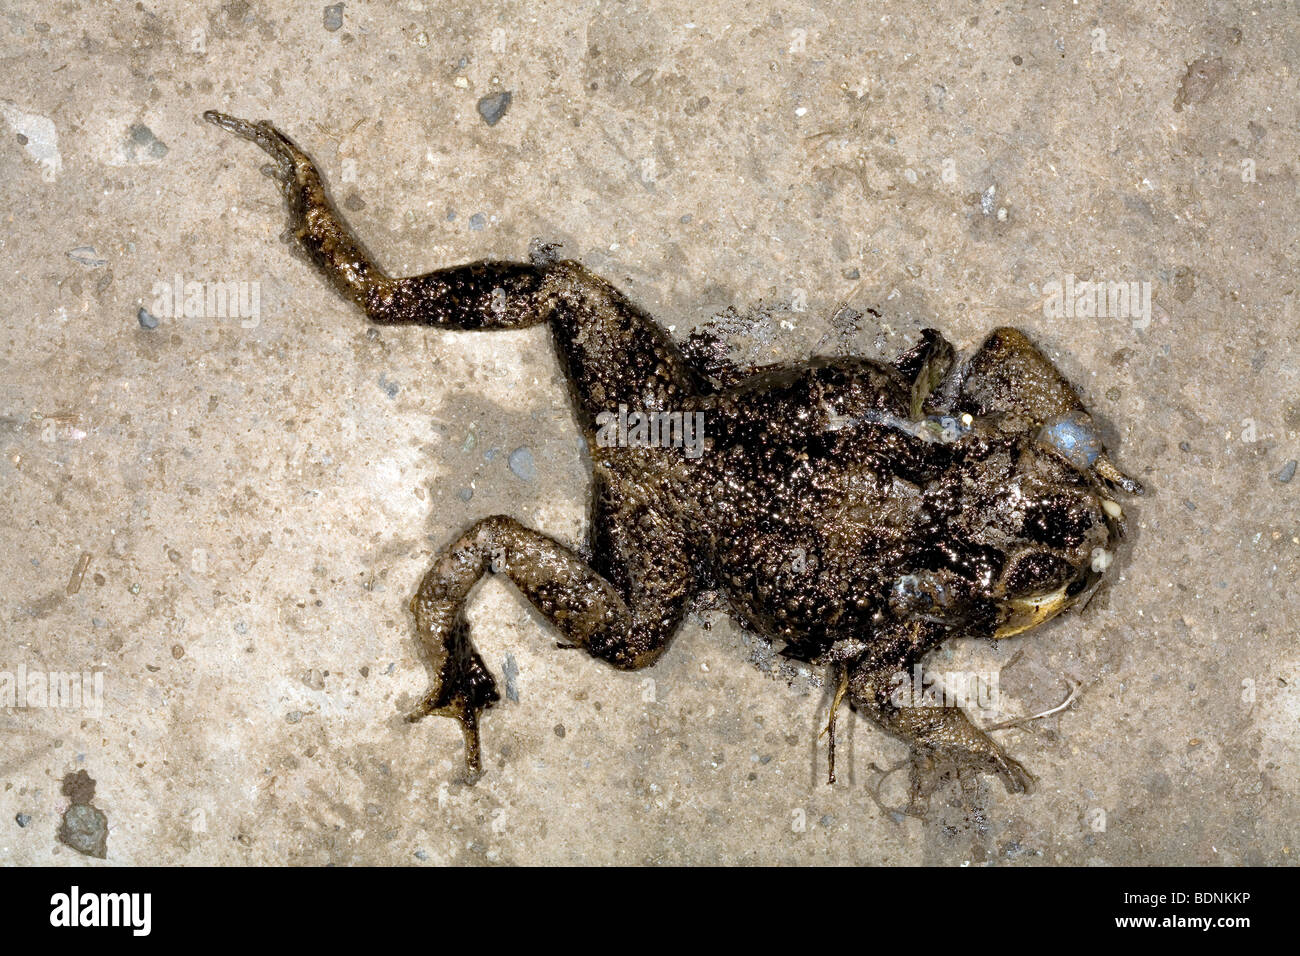 Cane toad (Rhinella marina) covered in crude oil and run over on a road Stock Photo